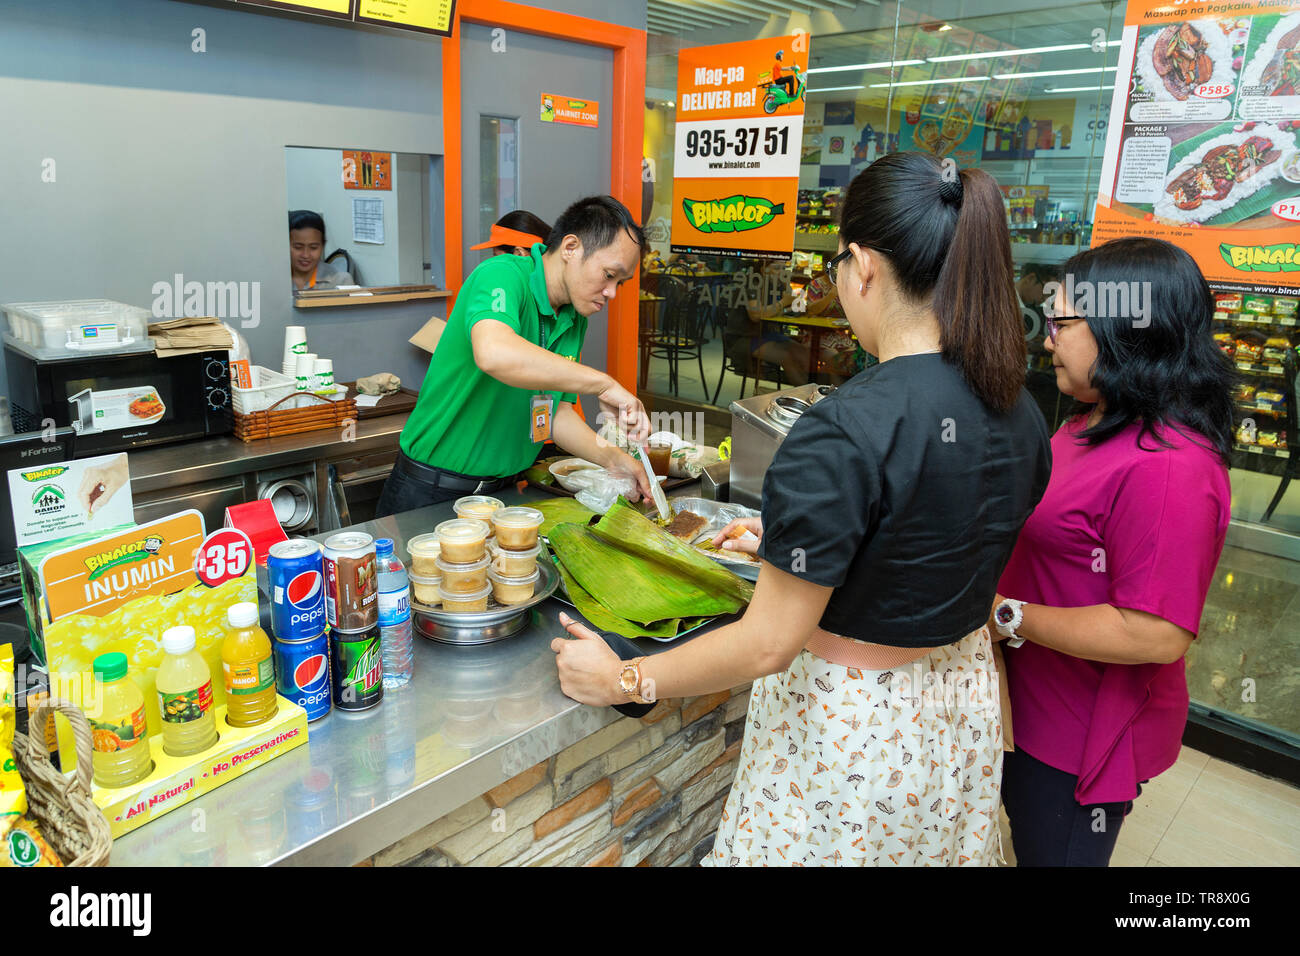 Manila, Philippines - July 26, 2016: Two female customers ordering food at the cashier in a filipino reastaurant Stock Photo